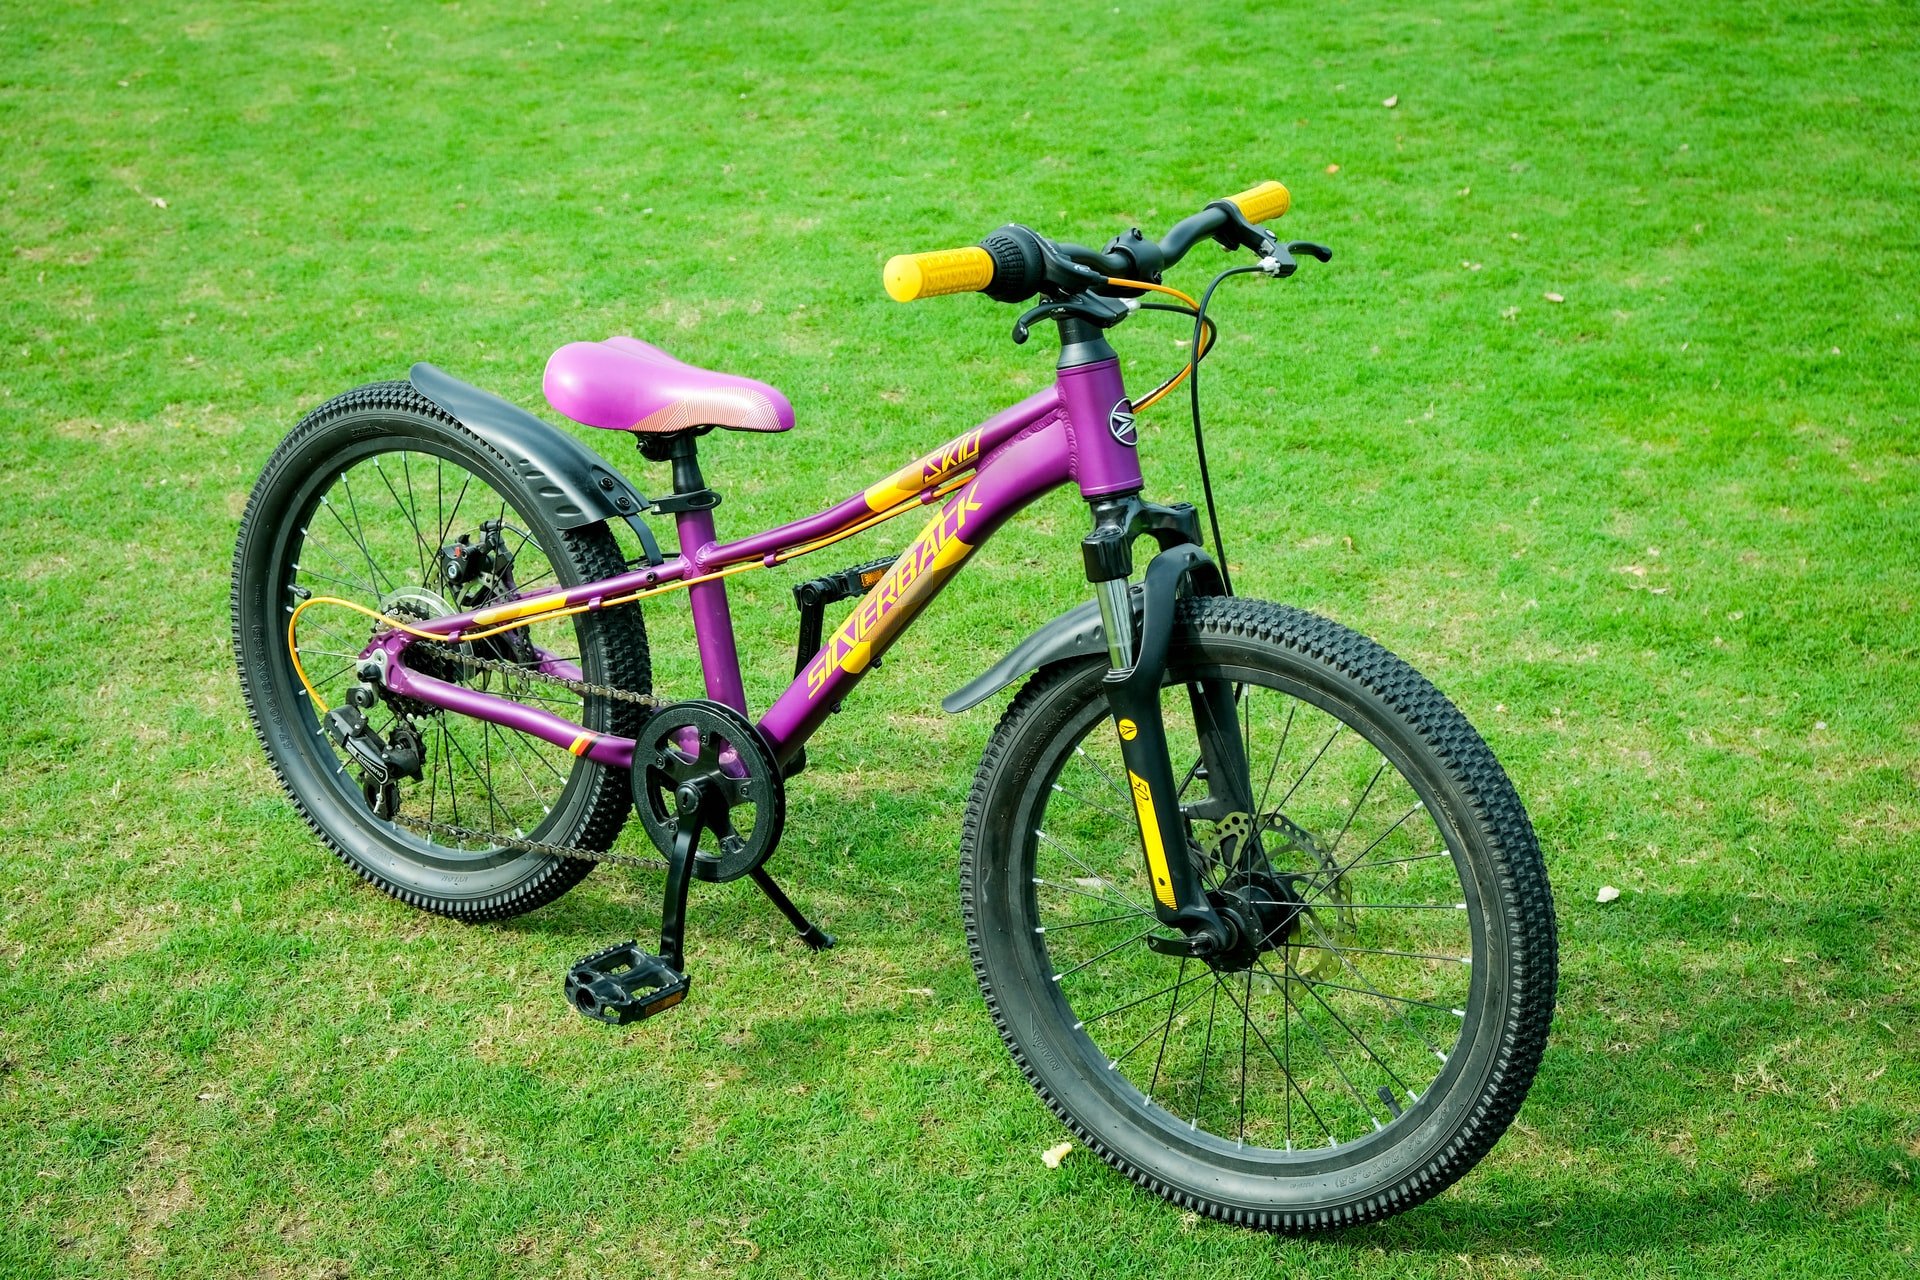 He told his son he found the bike in a nearby park. | Source: Unsplash